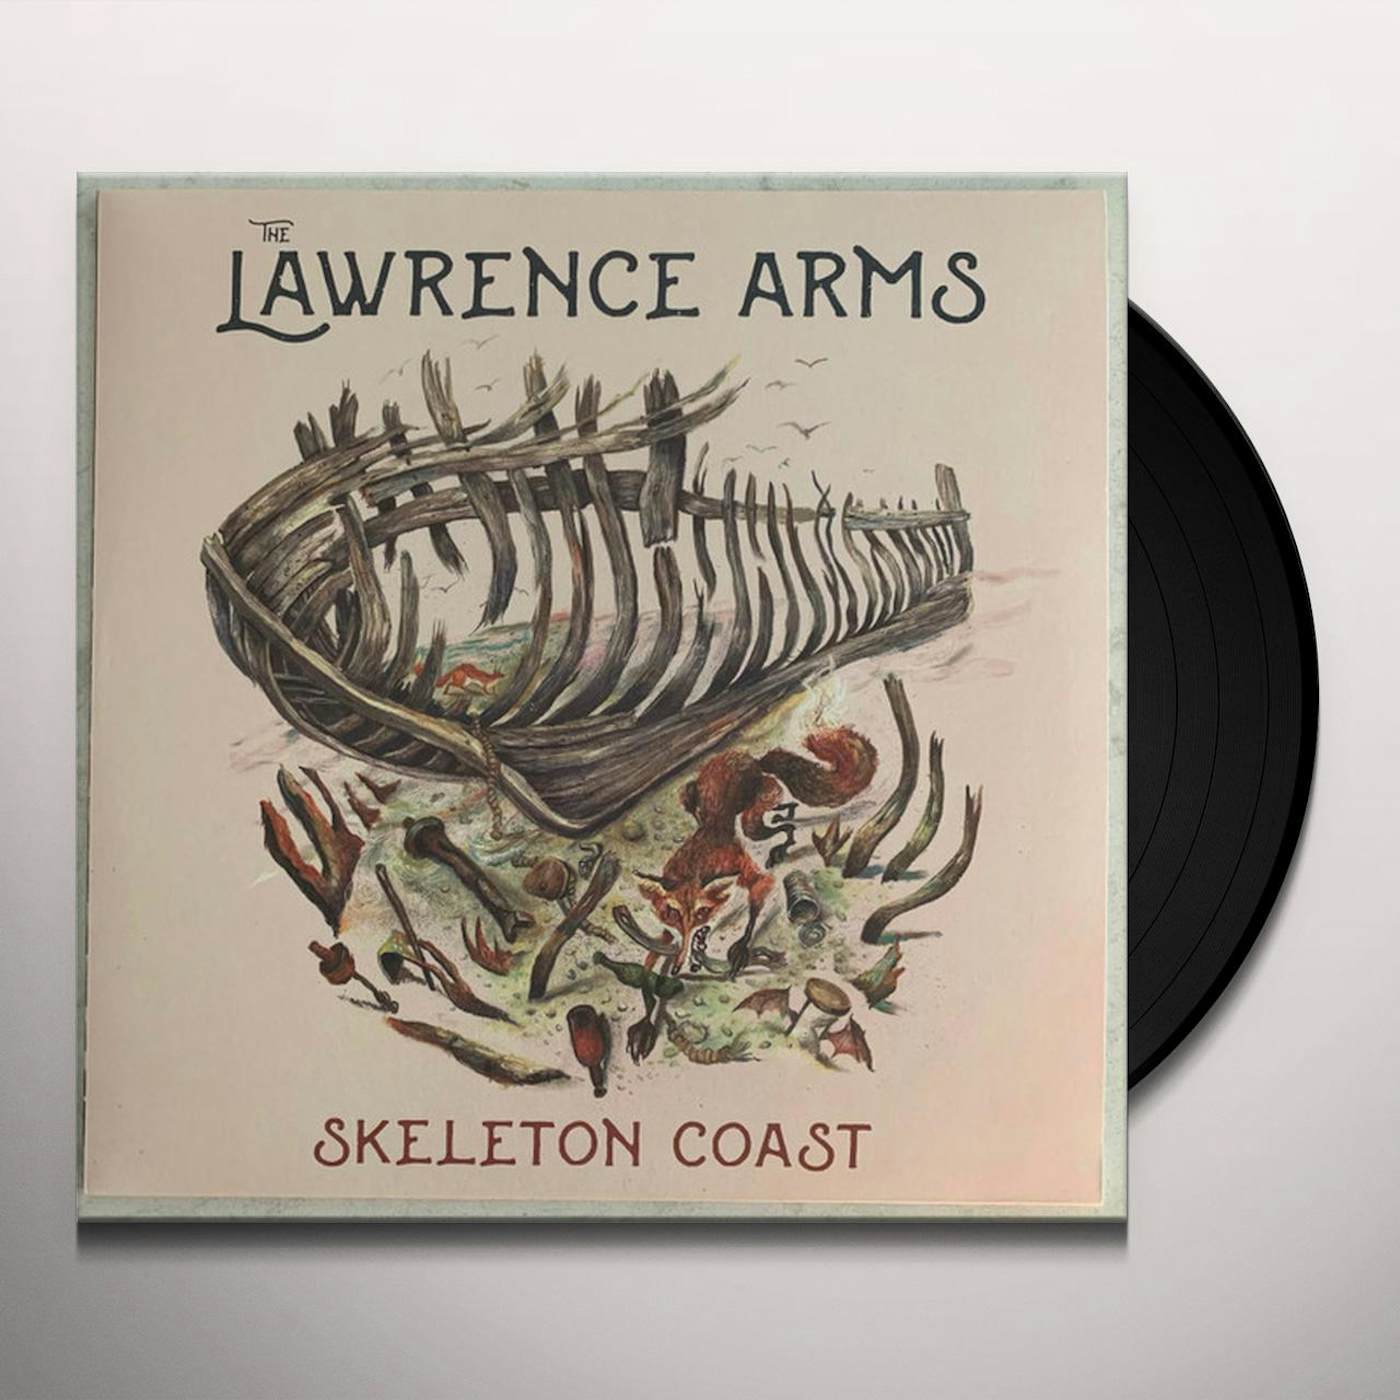 The Lawrence Arms Skeleton Coast Vinyl Record